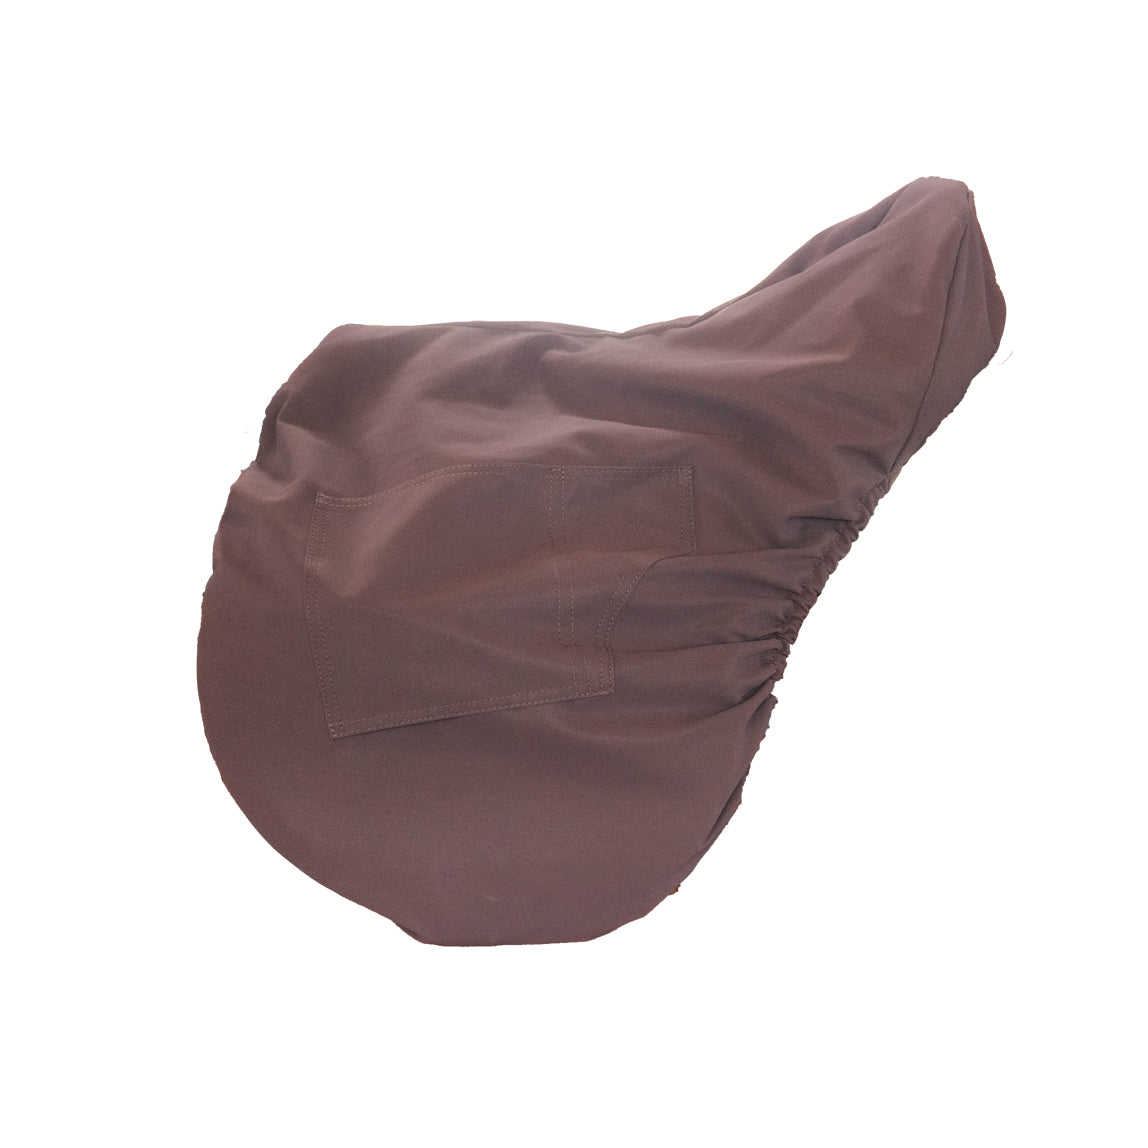 Saddle Cover for show jumping saddle